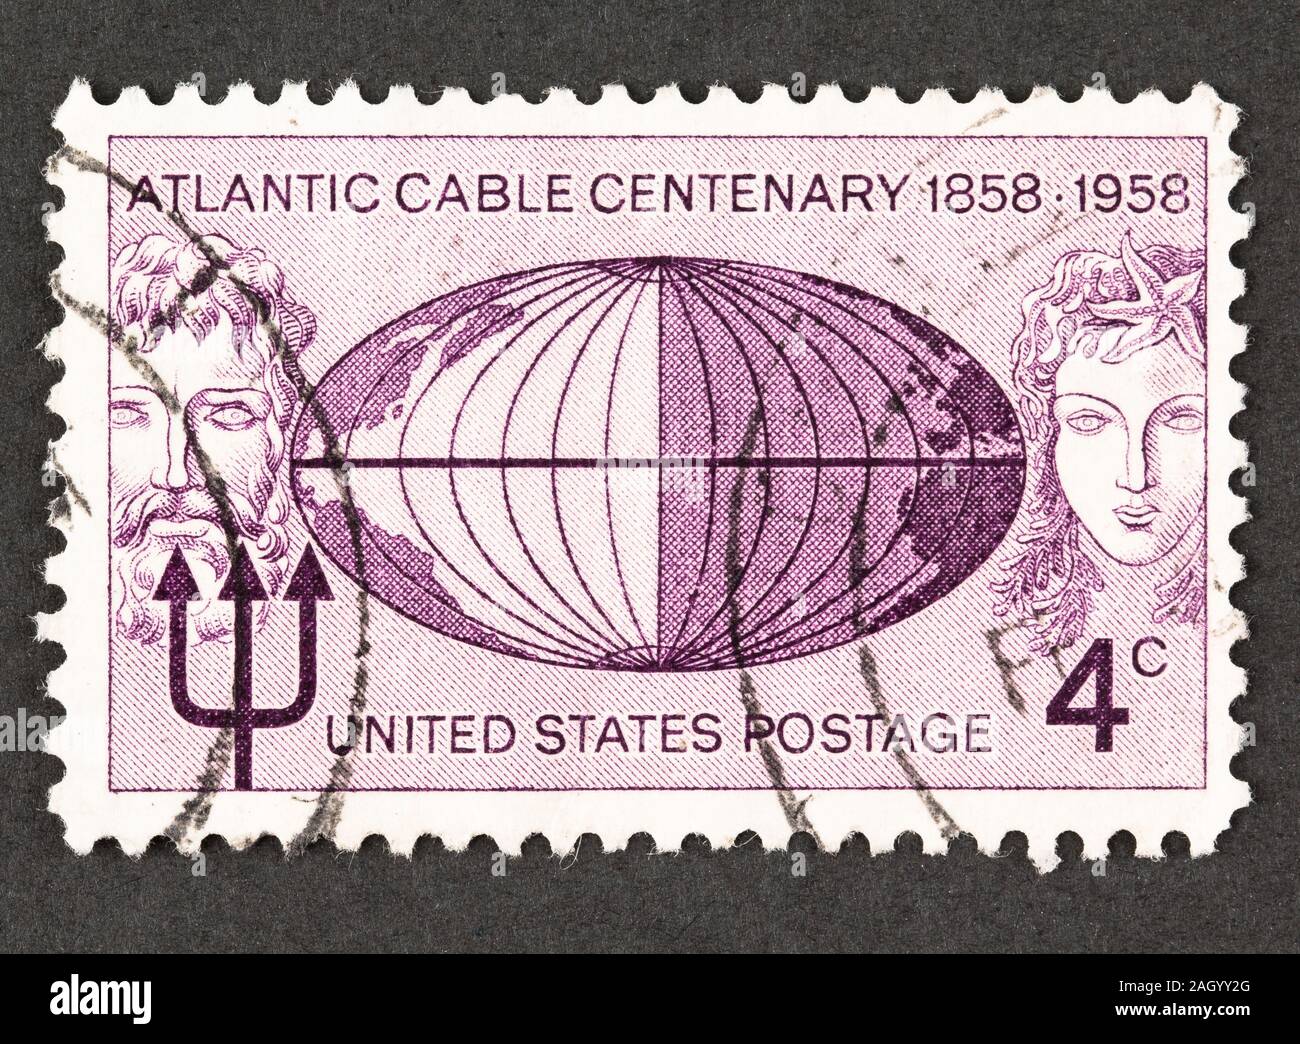 American 4 cent stamp commemorating the Atlantic Cable Centenary featuring Neptune, a mermaid and a globe. A rotary press printing issued in 1958. Stock Photo